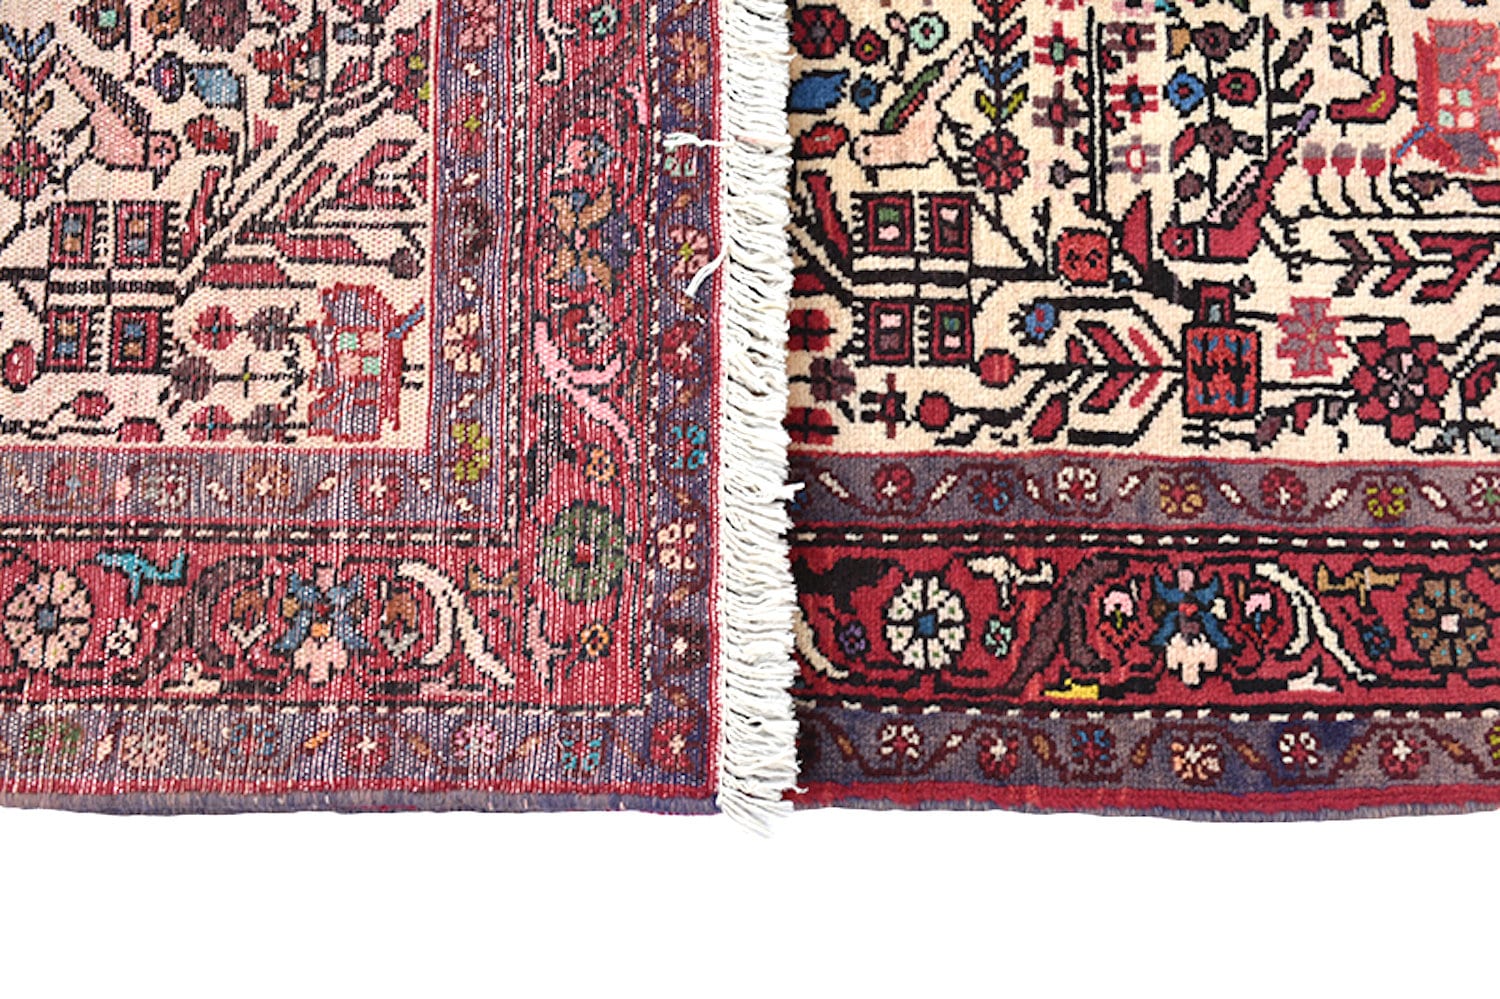 Birds & Plants  3 x 5 Colorful Rug | Red and Beige Rug | Vintage Persian Kazak | Hand Woven Antique Rug | Persian Style Landscape Rug